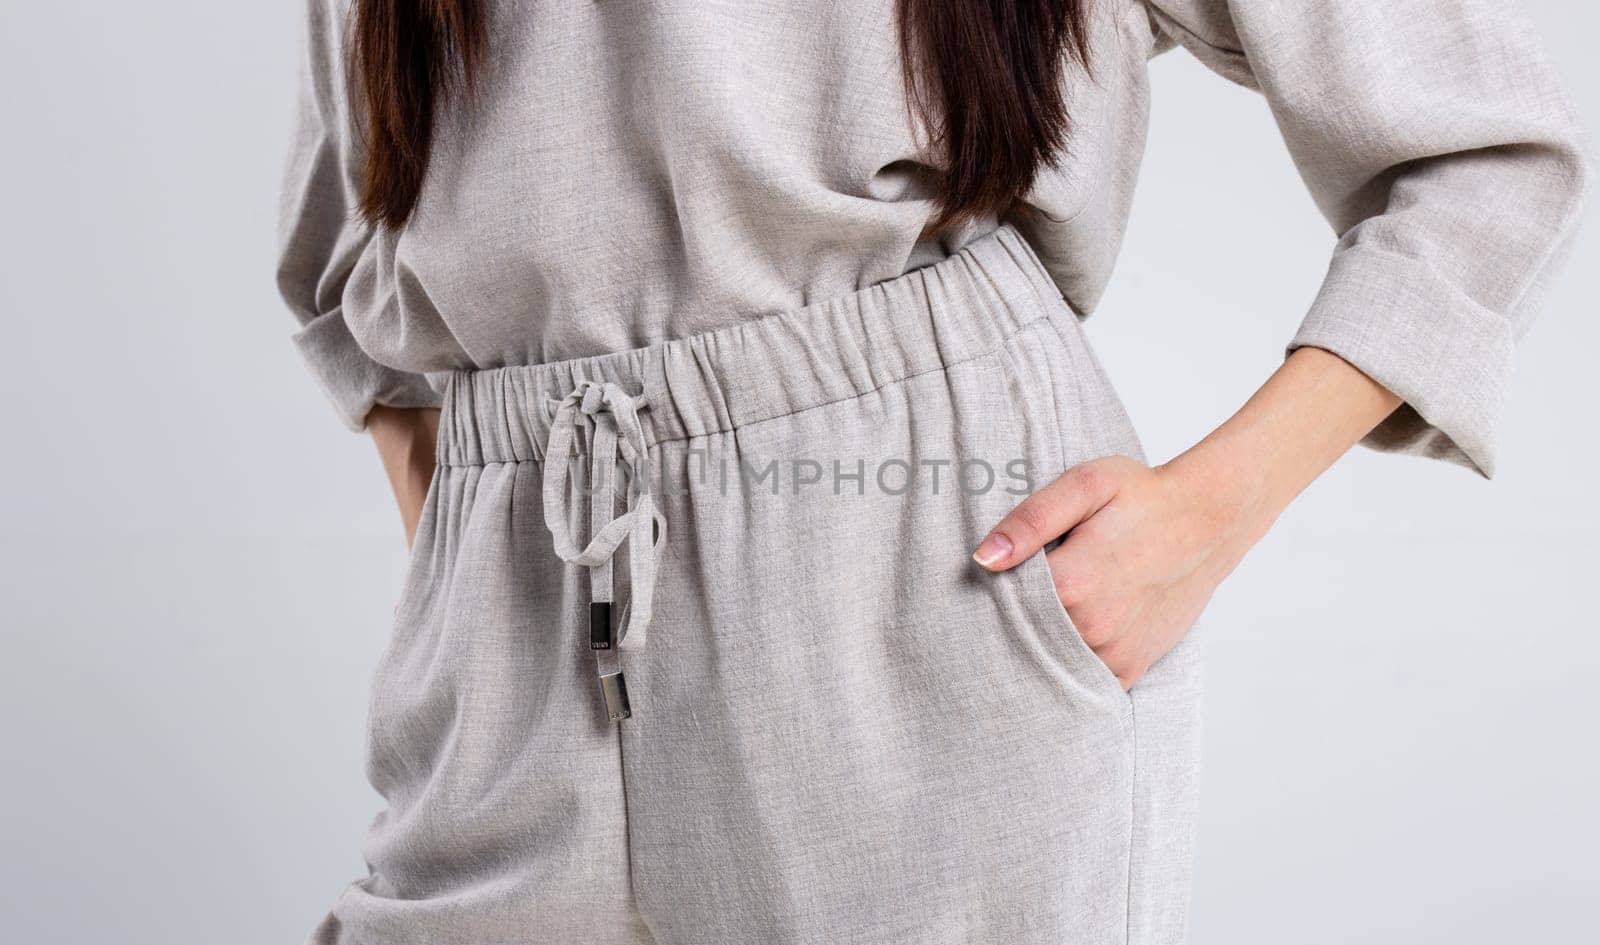 Model in elegant linen pantsuit, perfect for casual or smart-casual office looks. Breathable, lightweight fabric ideal for warm weather. Available in various colors to match your style.